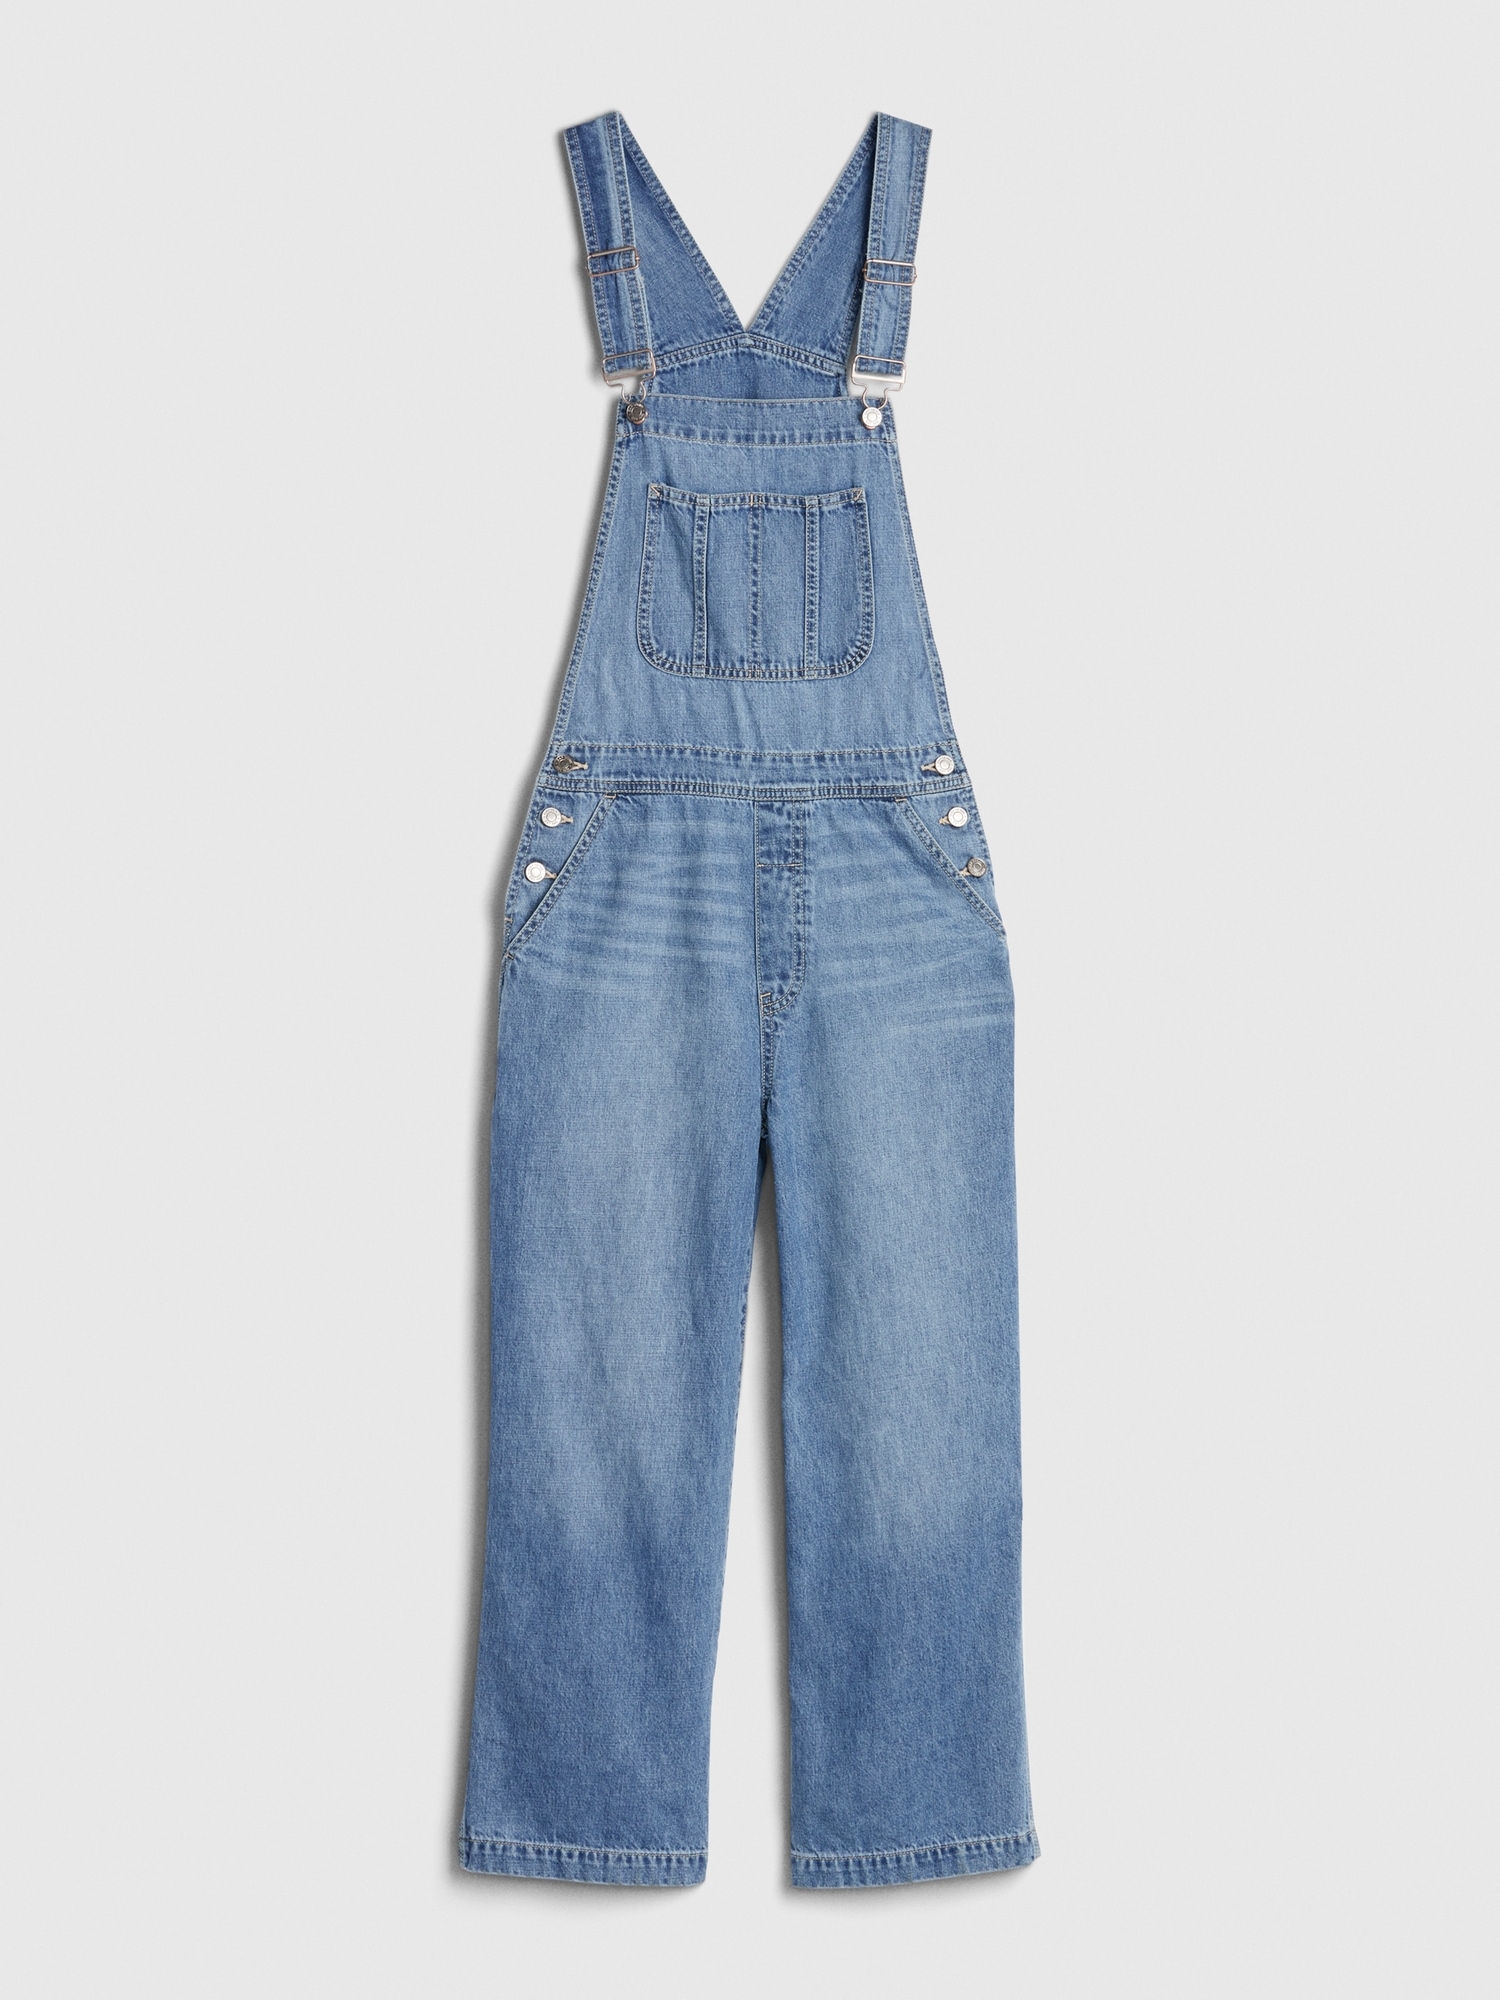 Y2K GAP Relaxed Fit Distressed Straight Leg Overalls Sz XS/S Boho Western |  eBay